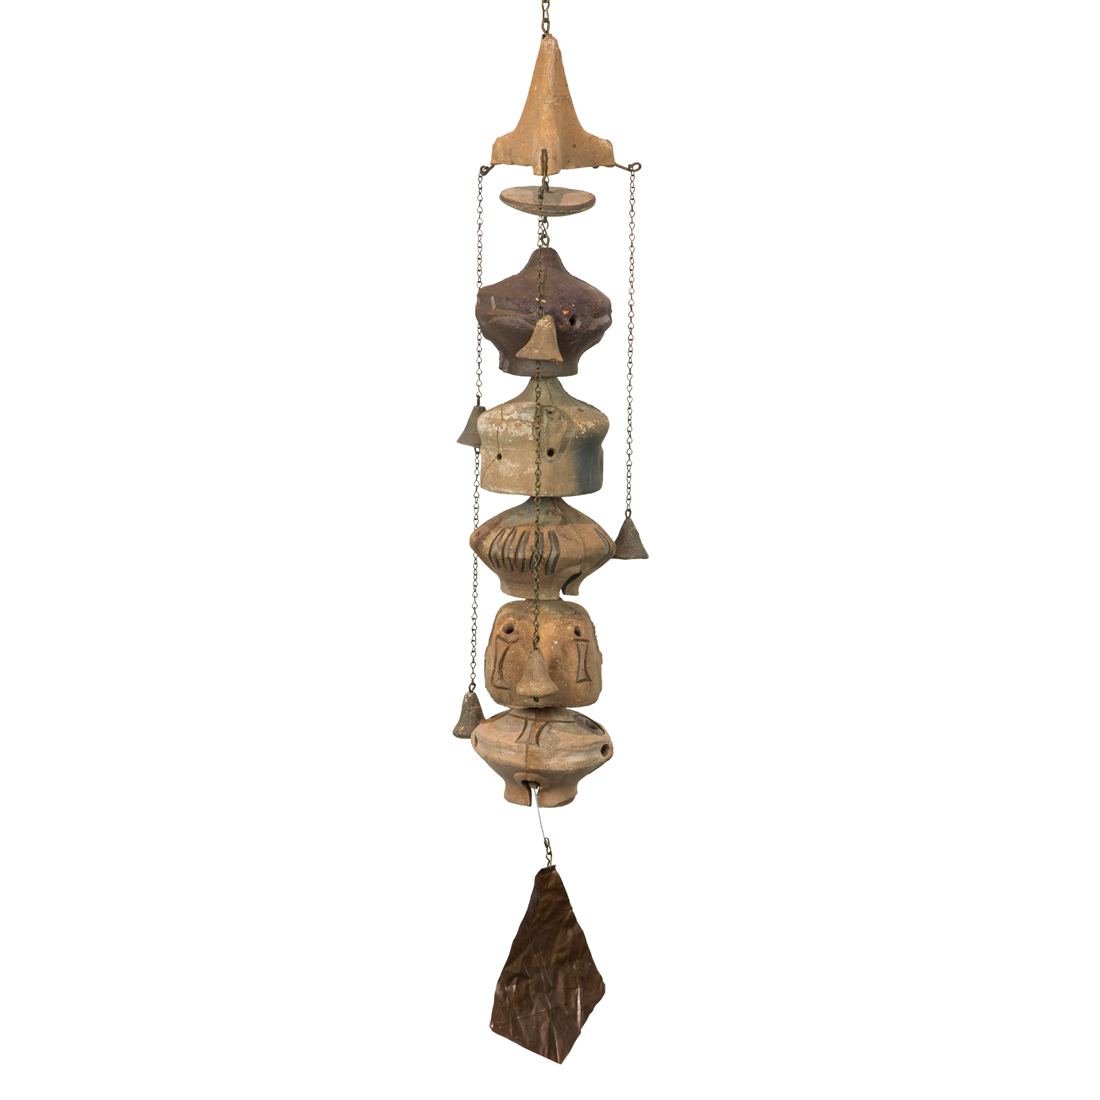 PAOLO SOLERI, LARGE WIND BELL Paolo